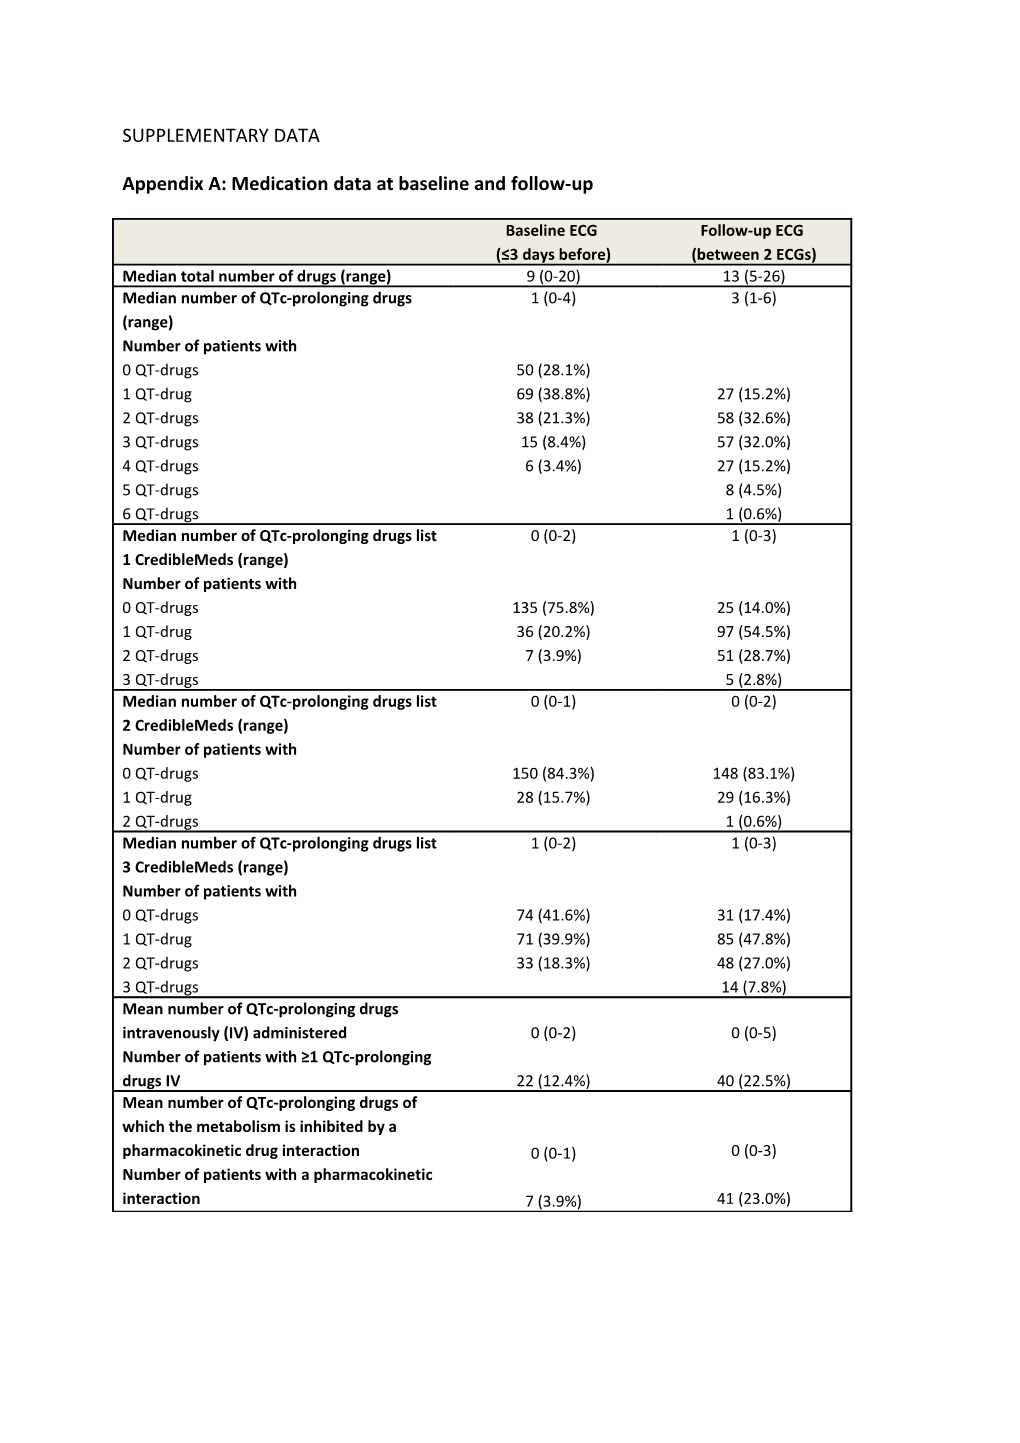 Appendix A: Medication Data at Baseline and Follow-Up